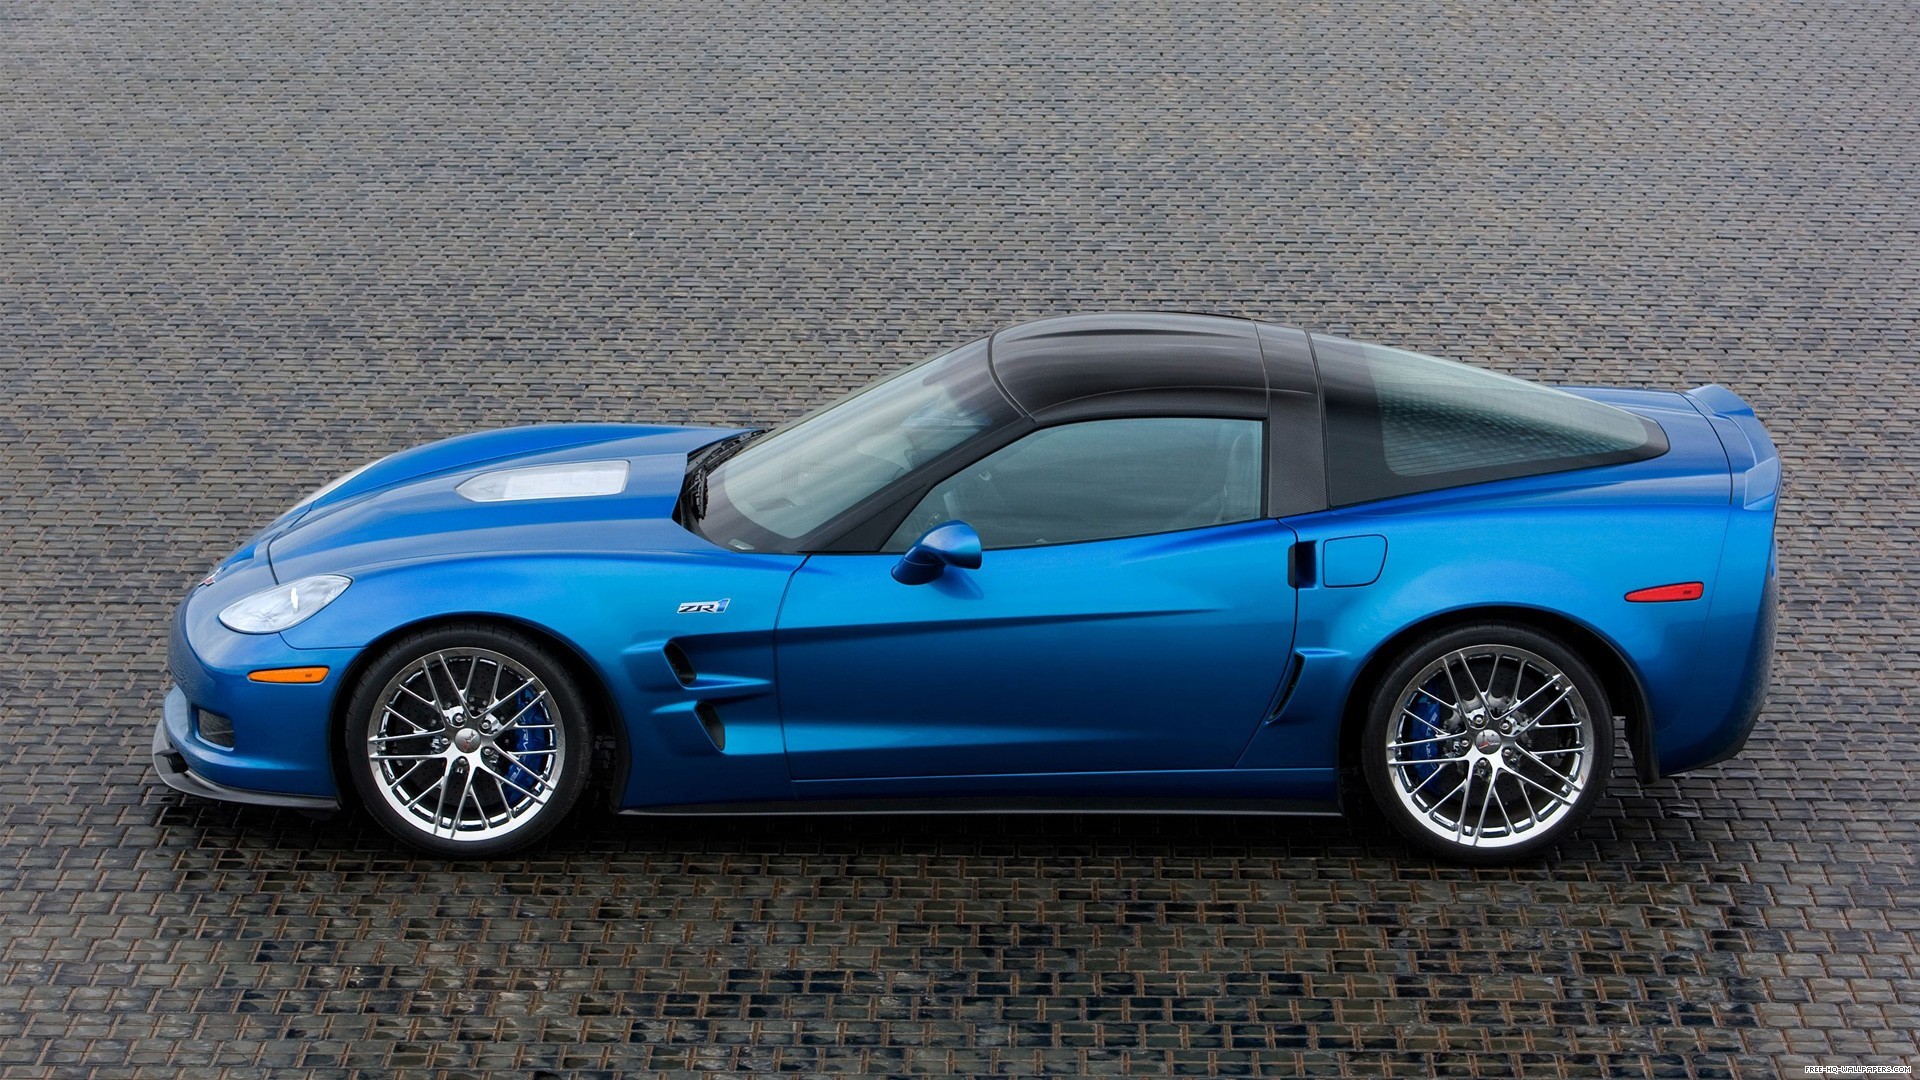 Cars Wallpapers on Cars Chevrolet Vehicles Corvette Zr1 Blue C6 Hd Wallpaper Of Cars